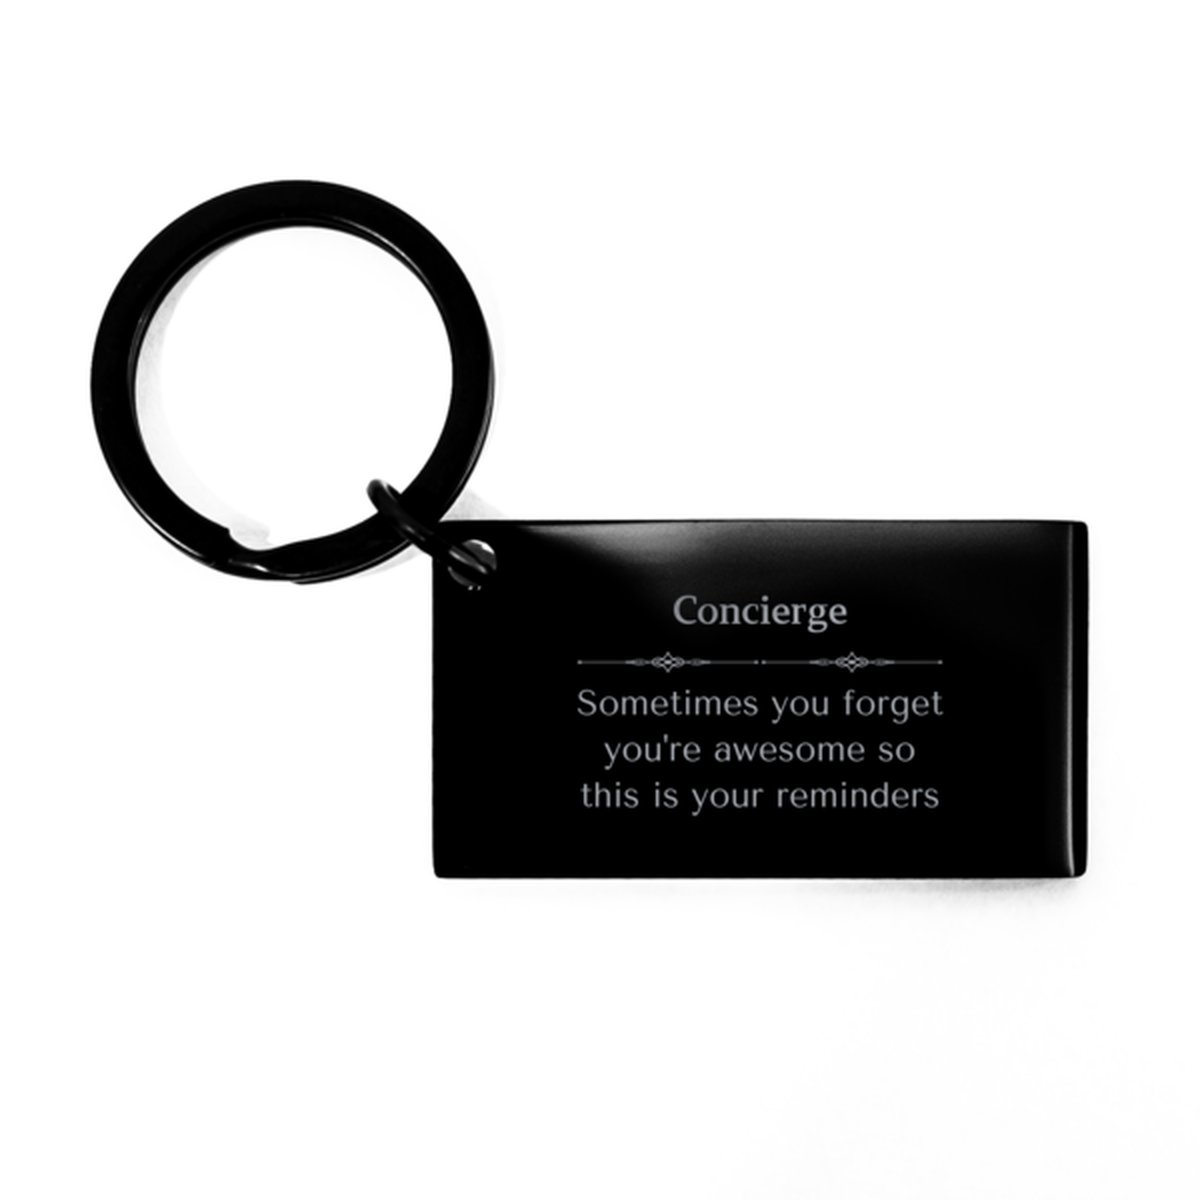 Sentimental Concierge Keychain, Engineer Sometimes you forget you're awesome so this is your reminders, Graduation Christmas Birthday Gifts for Concierge, Men, Women, Coworkers